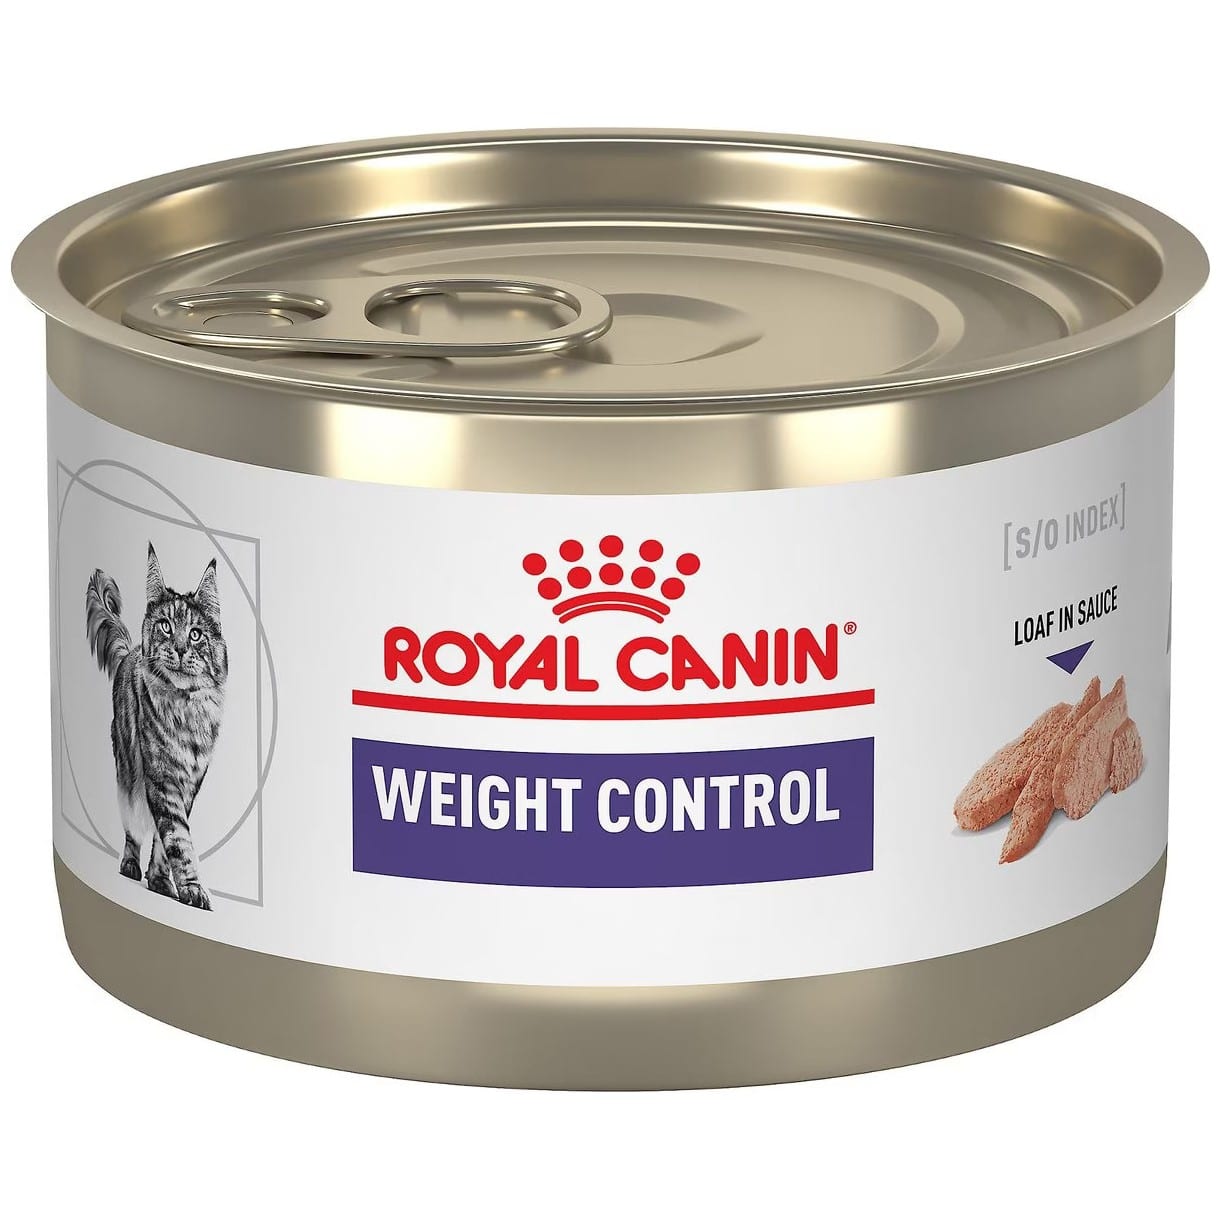 Royal Canin Veterinary Diet Adult Weight Control Loaf in Sauce Canned Cat Food